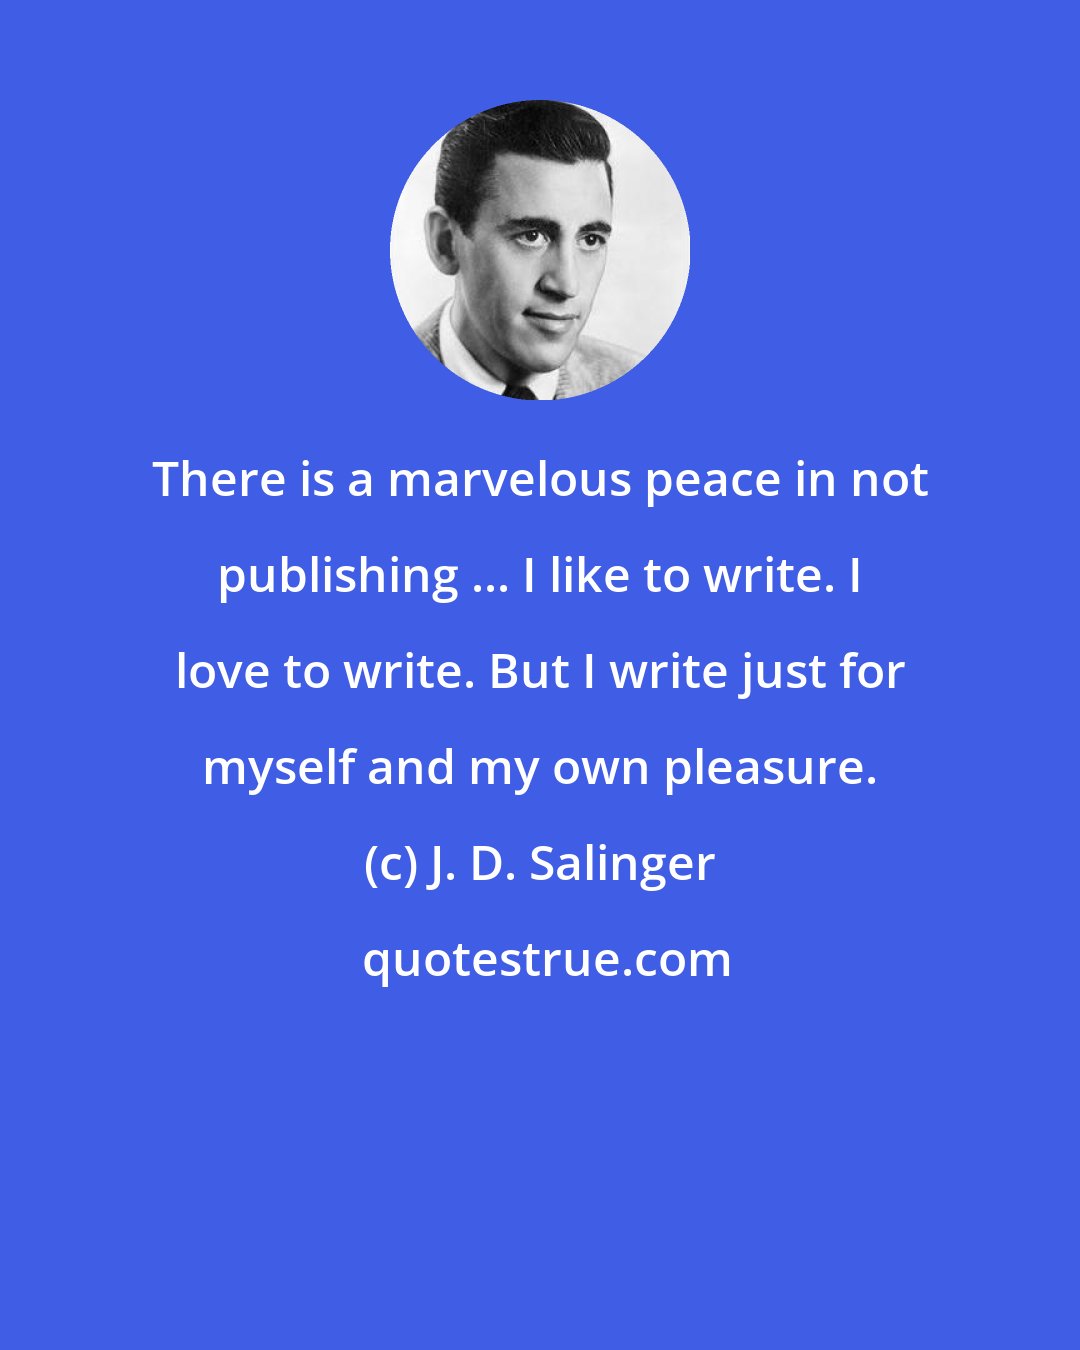 J. D. Salinger: There is a marvelous peace in not publishing ... I like to write. I love to write. But I write just for myself and my own pleasure.